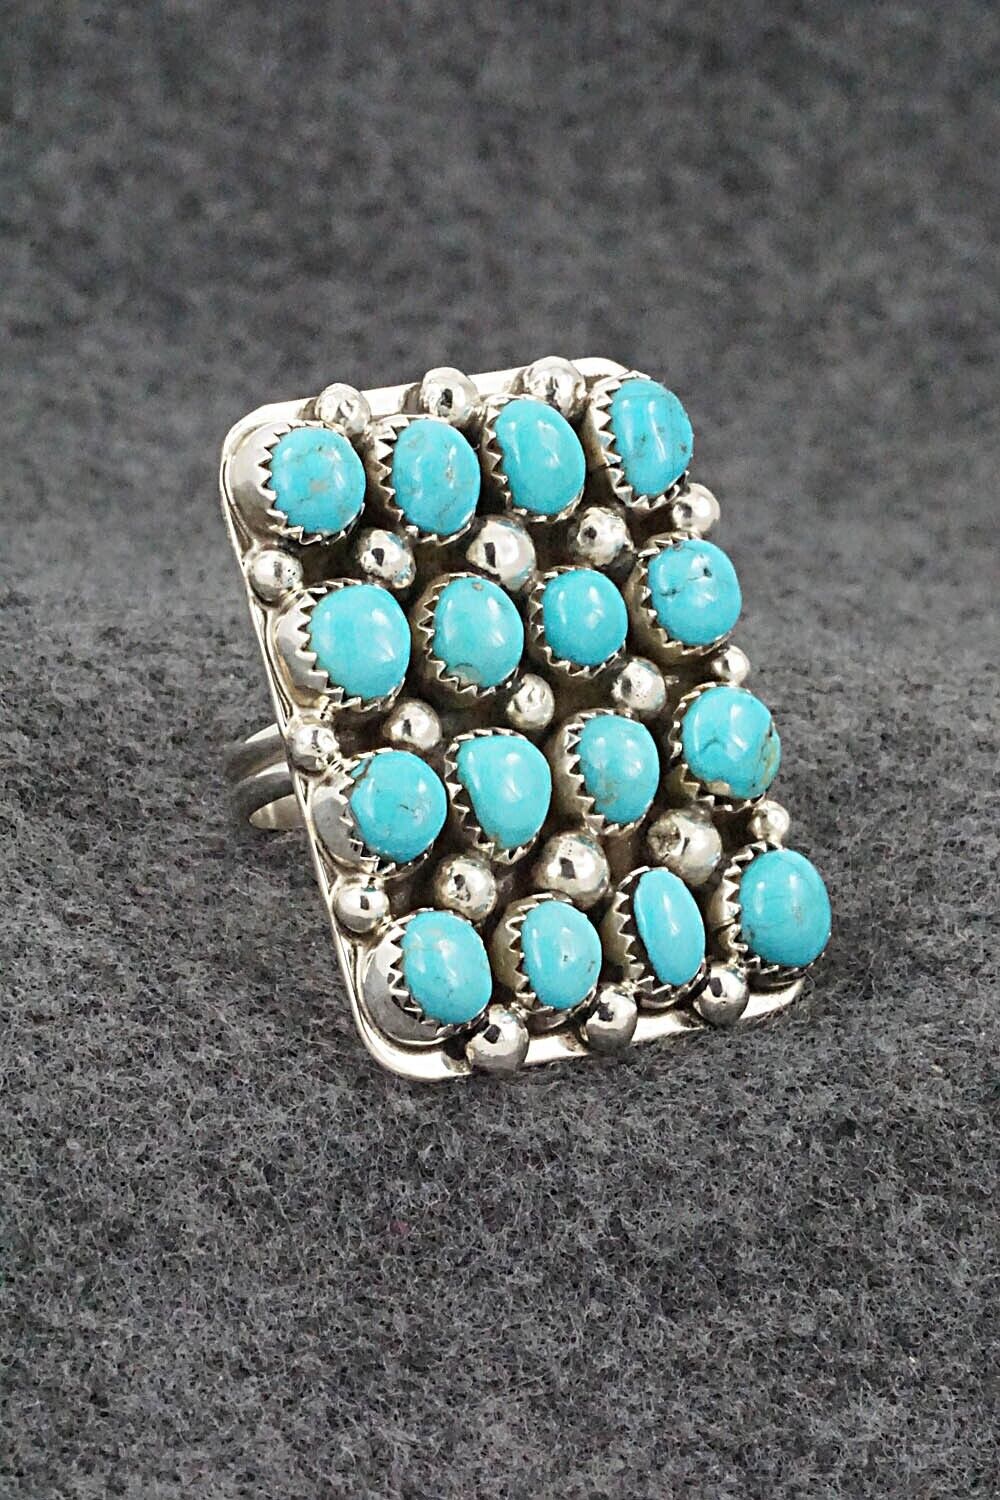 Turquoise and Sterling Silver Ring - Darlene Begay - Size 8.75